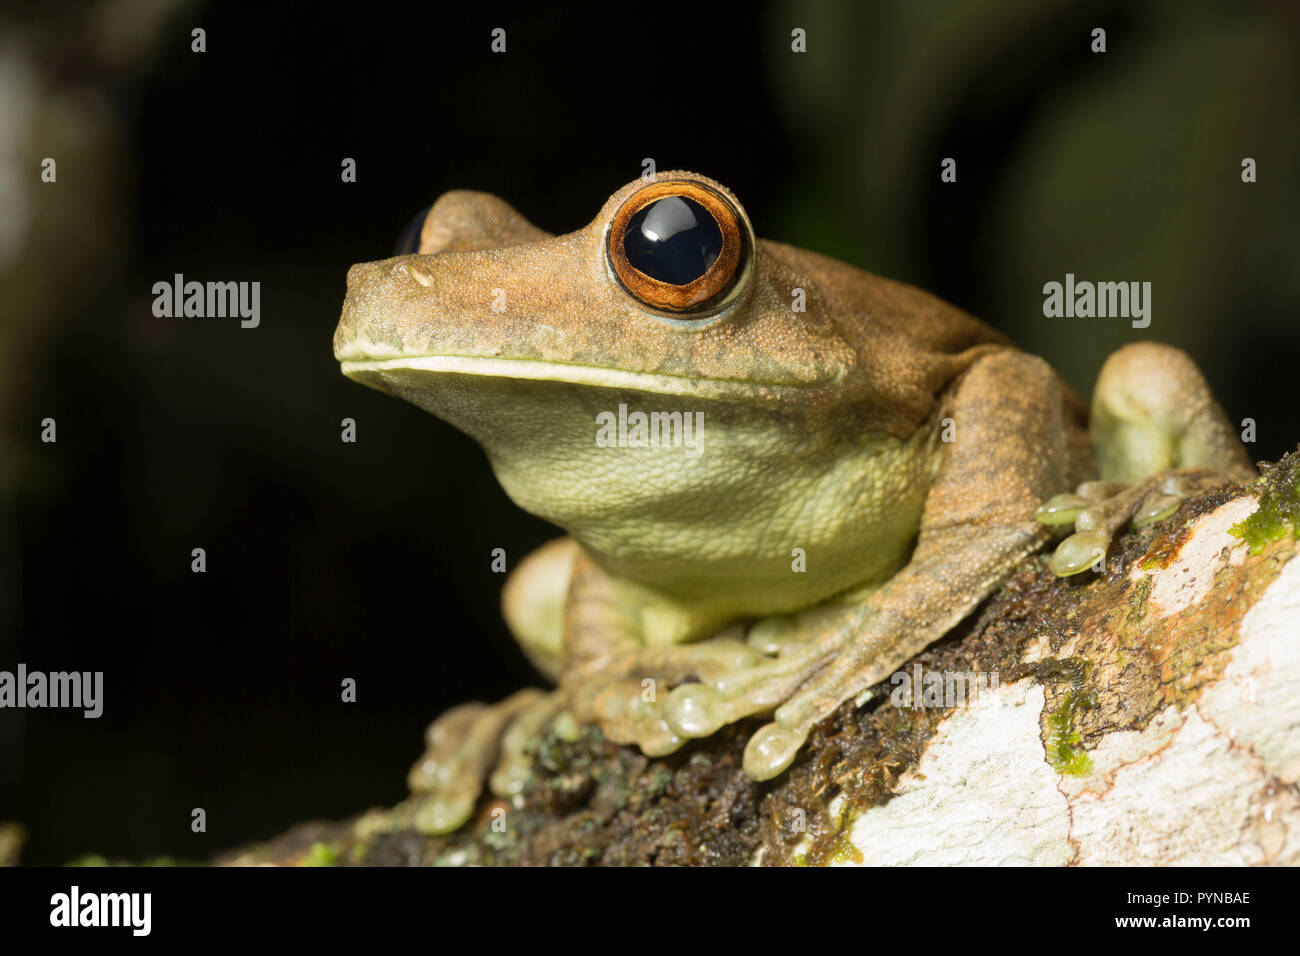 A tree frog photographed in the jungles of Suriname near Botapassie on the Suriname River. Suriname is noted for its unspoiled rainforests and biodive Stock Photo